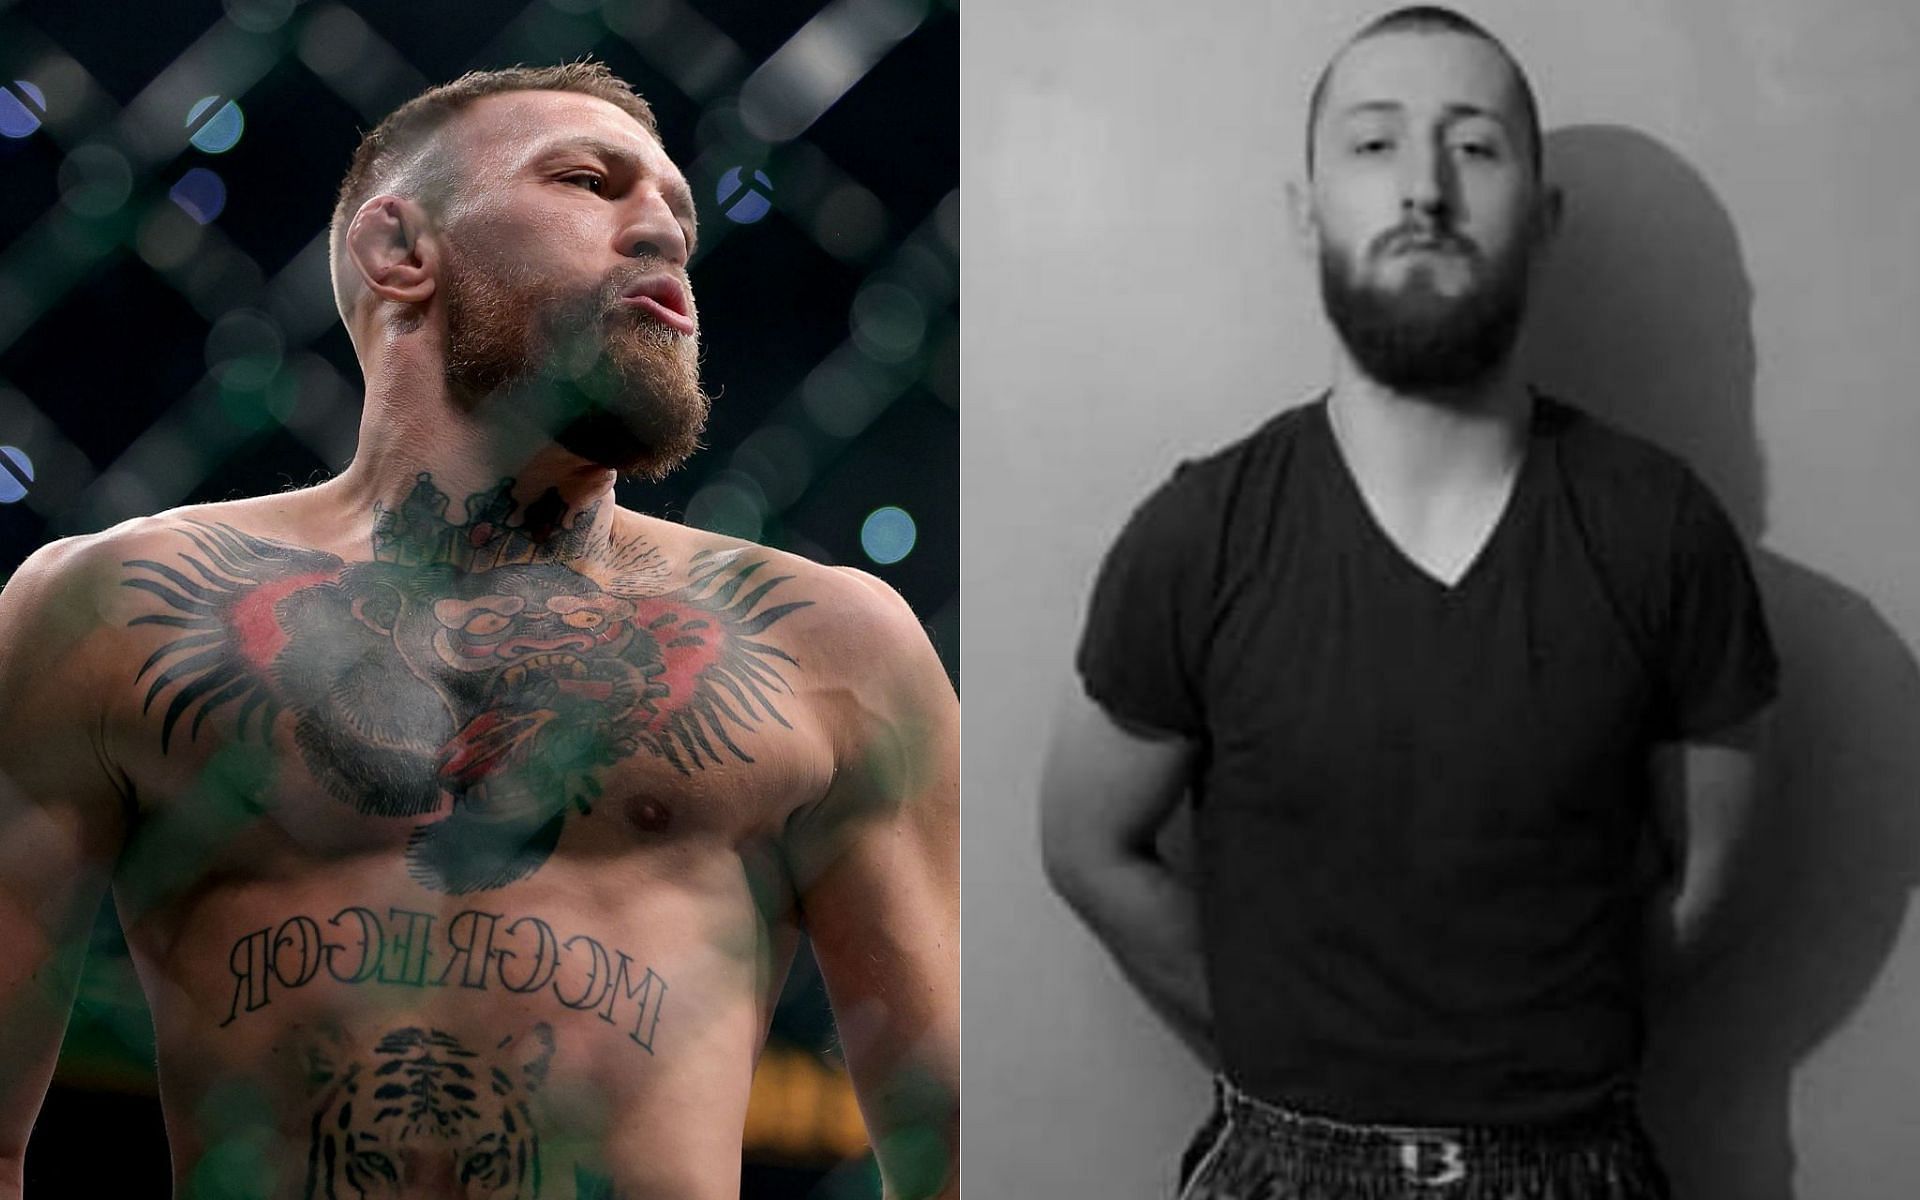 Conor McGregor (left) and Ian Coughlan (right) [Image credits: @iancoughlanmma on Instagram]